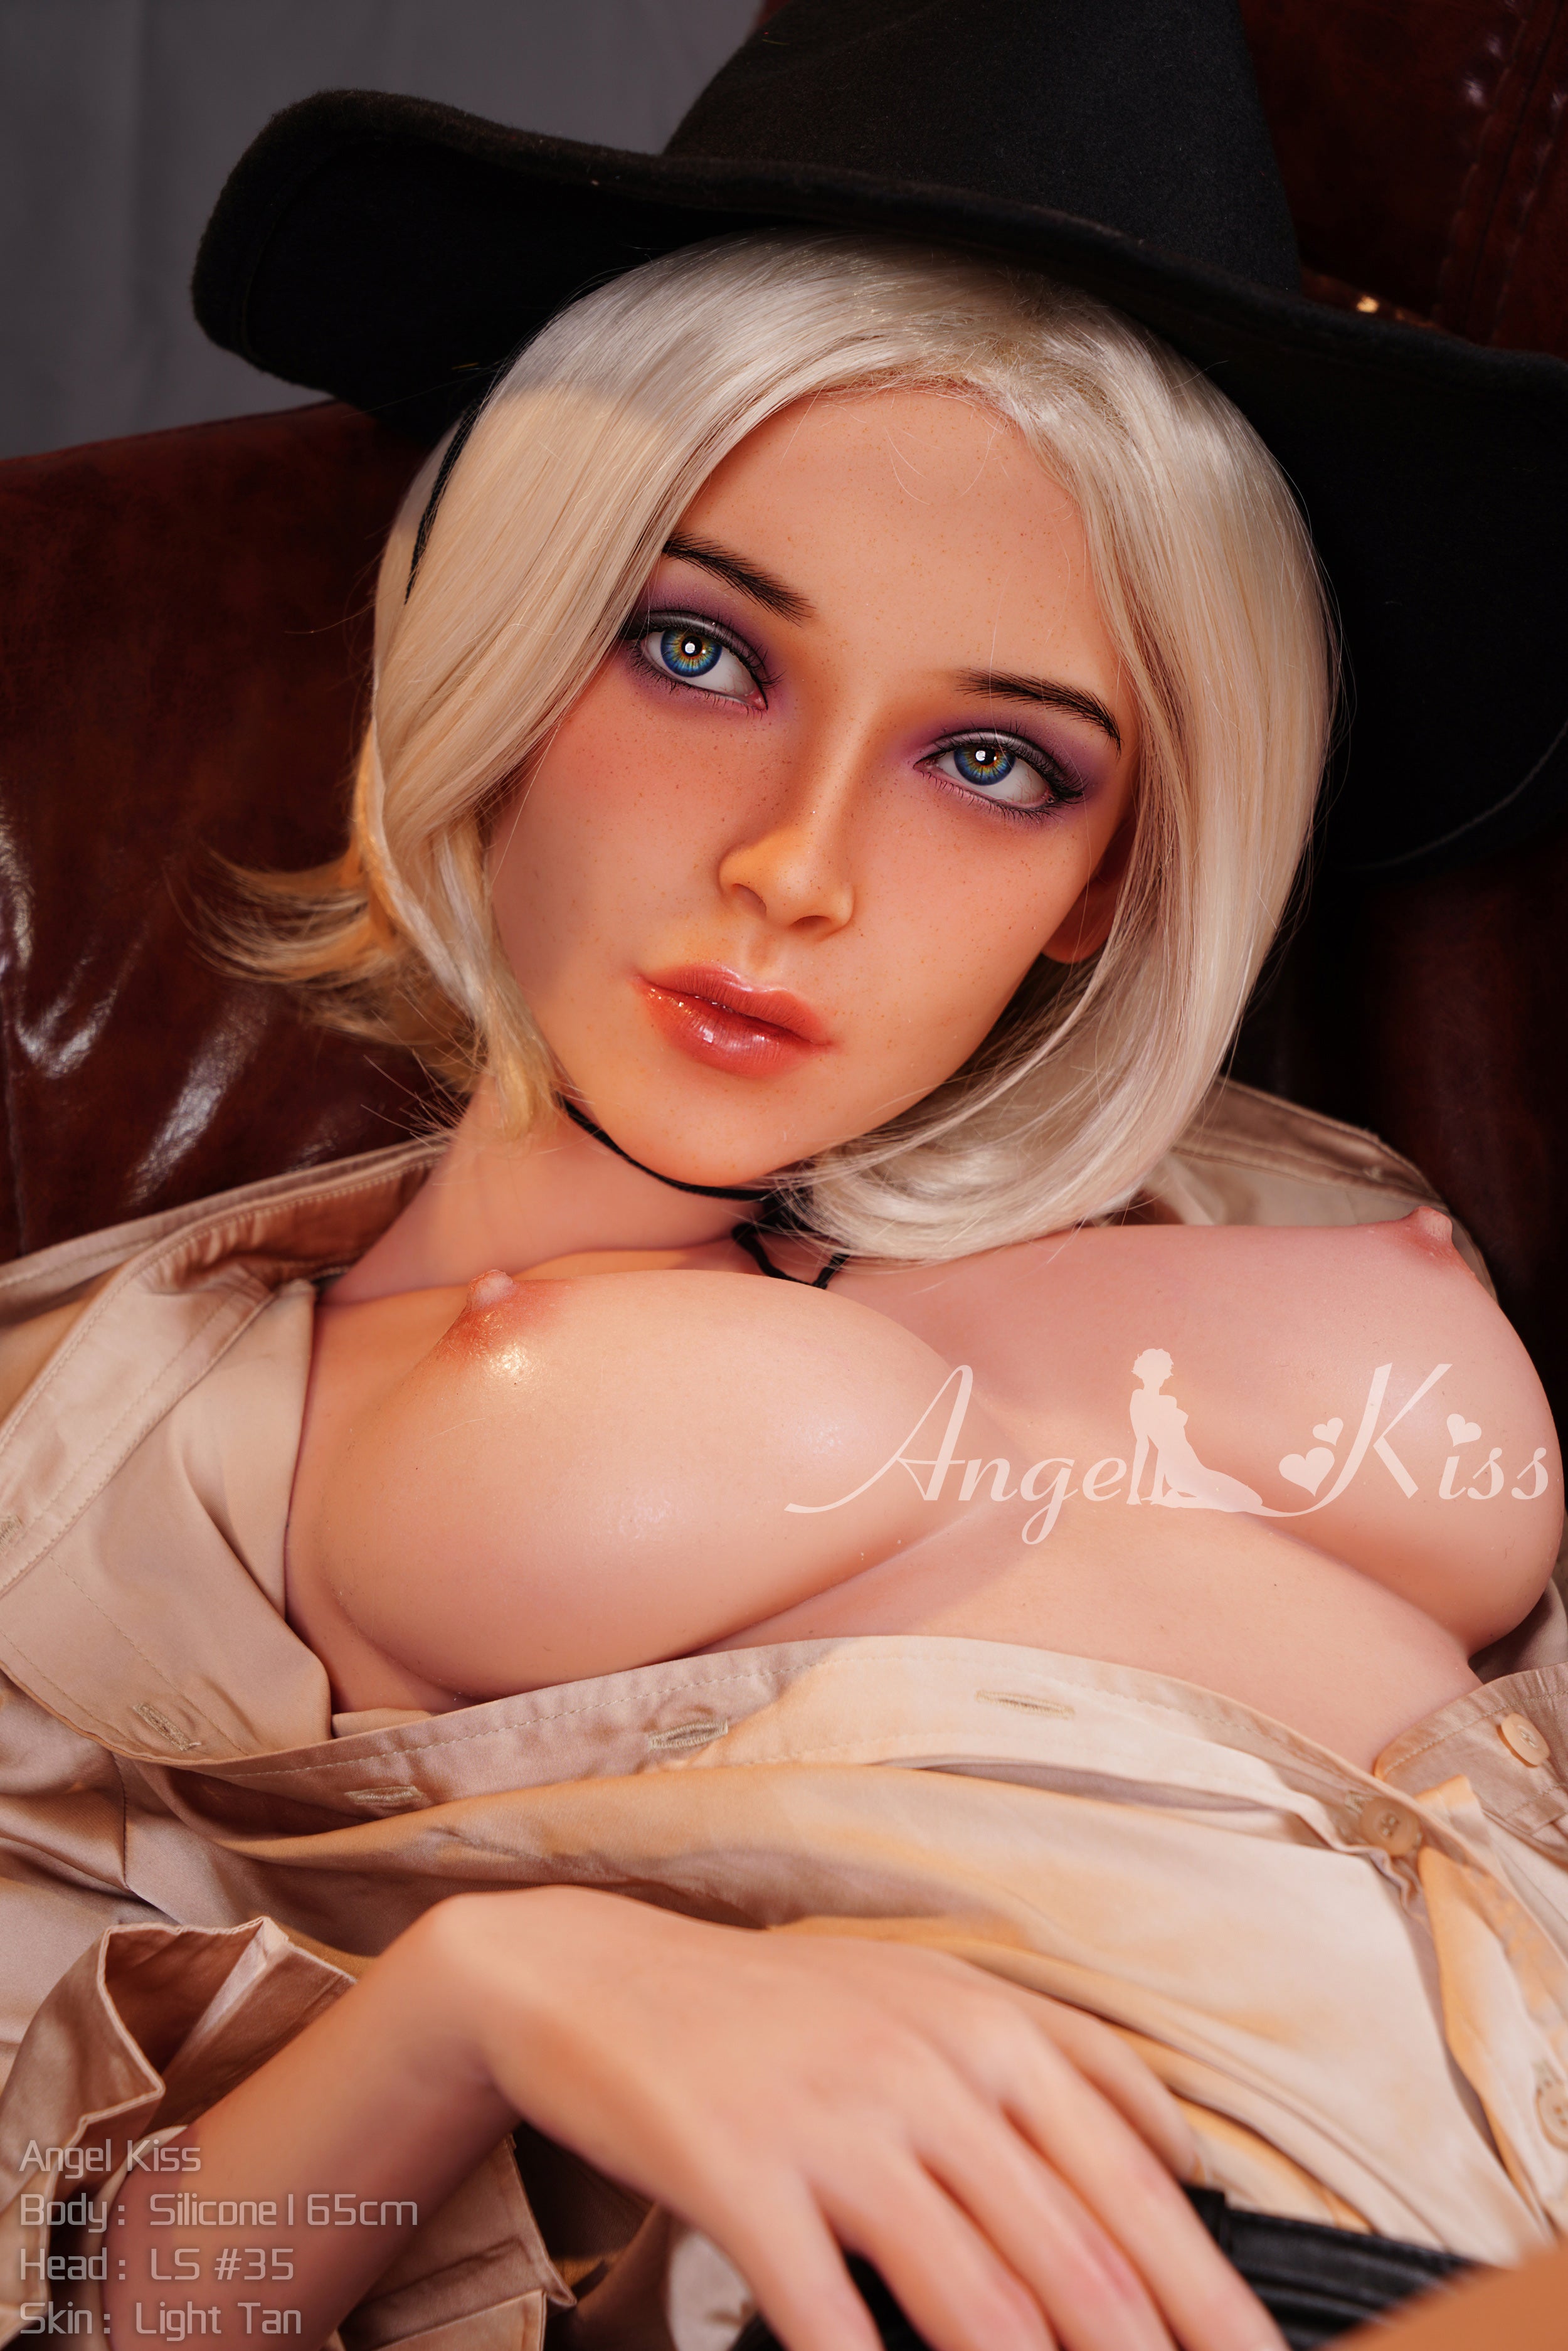 Angelkiss Doll 165 cm Silicone - Noemi | Buy Sex Dolls at DOLLS ACTUALLY